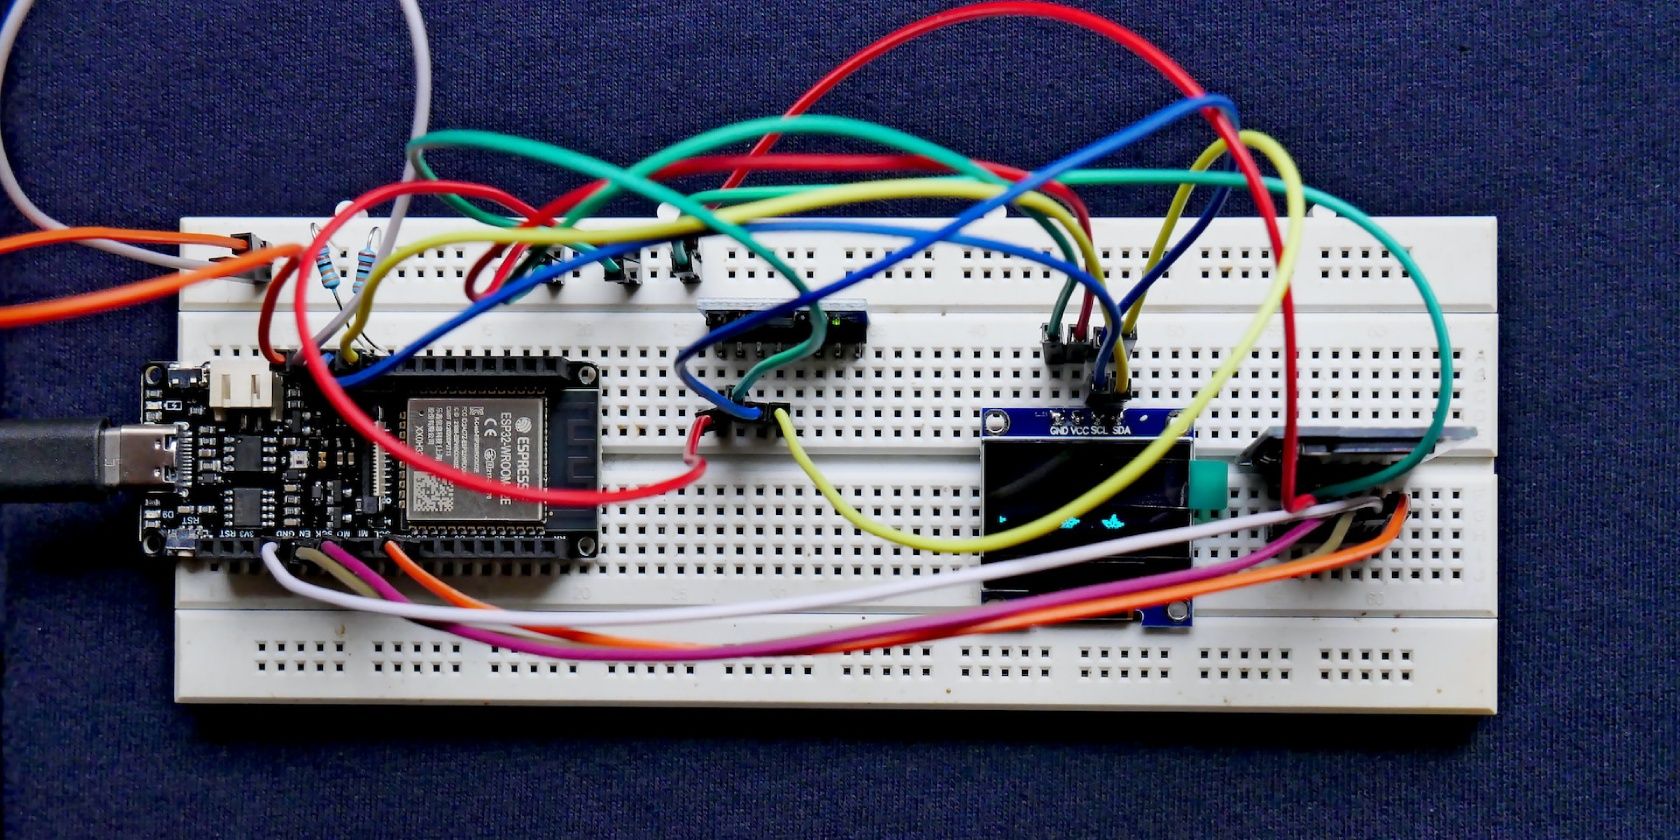 A DFRobot FireBeetle development board hooked up to an accelerometer sensor, OLED display and an SD card module on a breadboard.